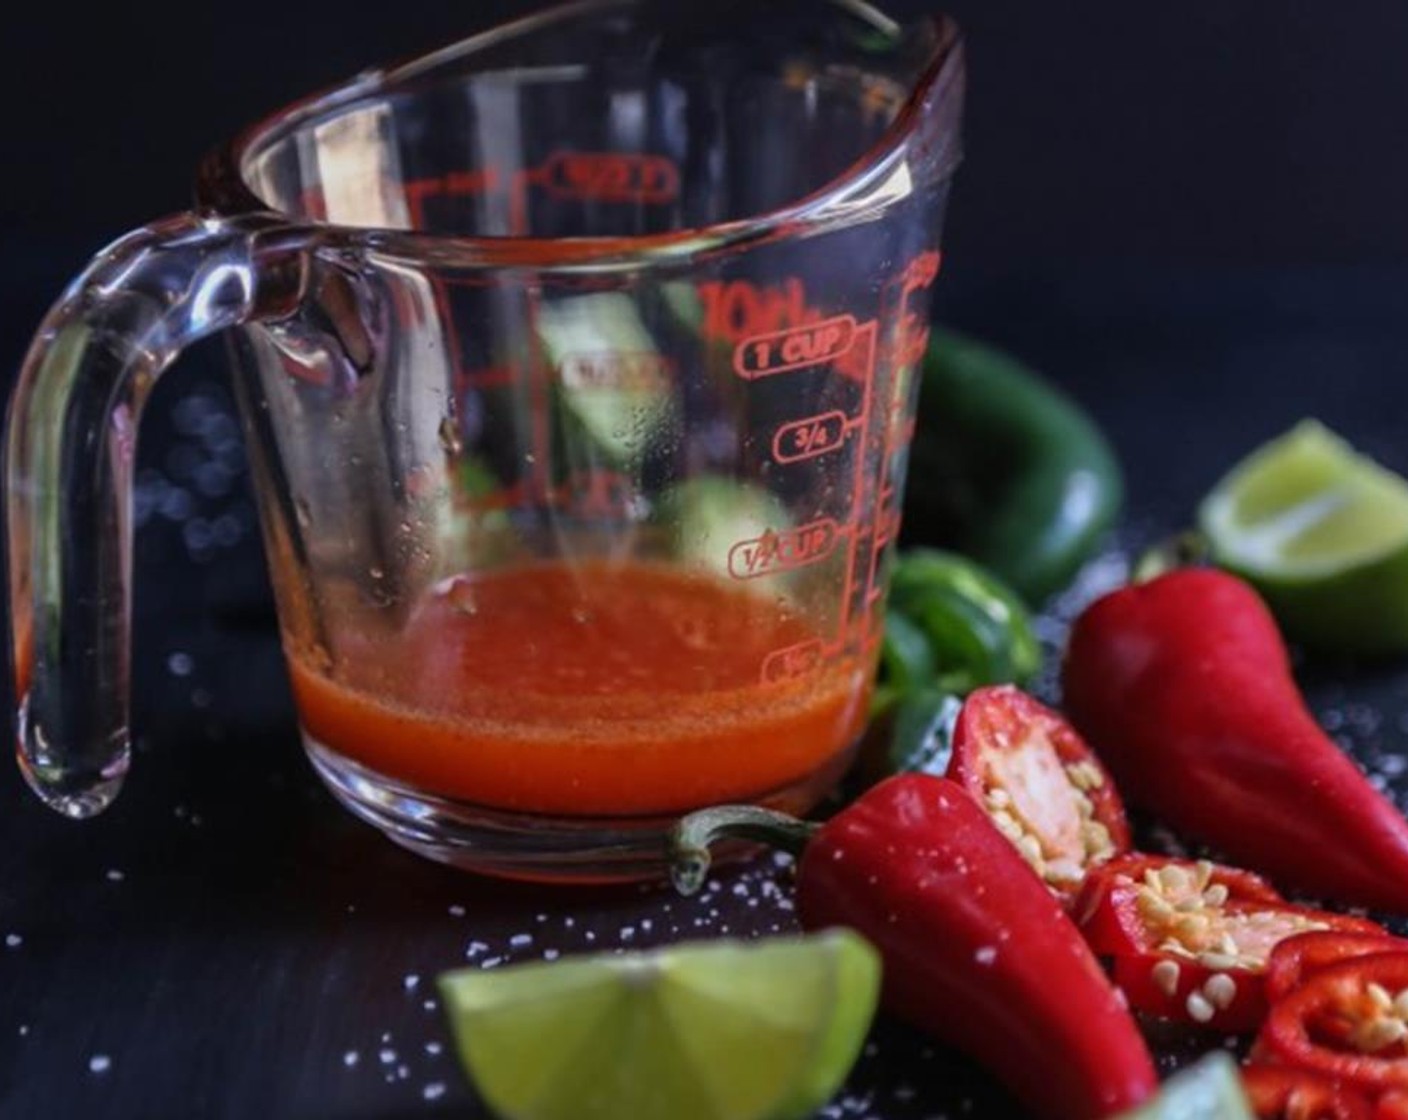 step 2 In a large pitcher, combine kimchi juice, juice from Lime (1), Tomato Juice (1/2 cup), Serrano Chili (1), and Jalapeño Pepper (1/2). Place the pitcher in the fridge and let the flavor combines for at least 30 minutes.